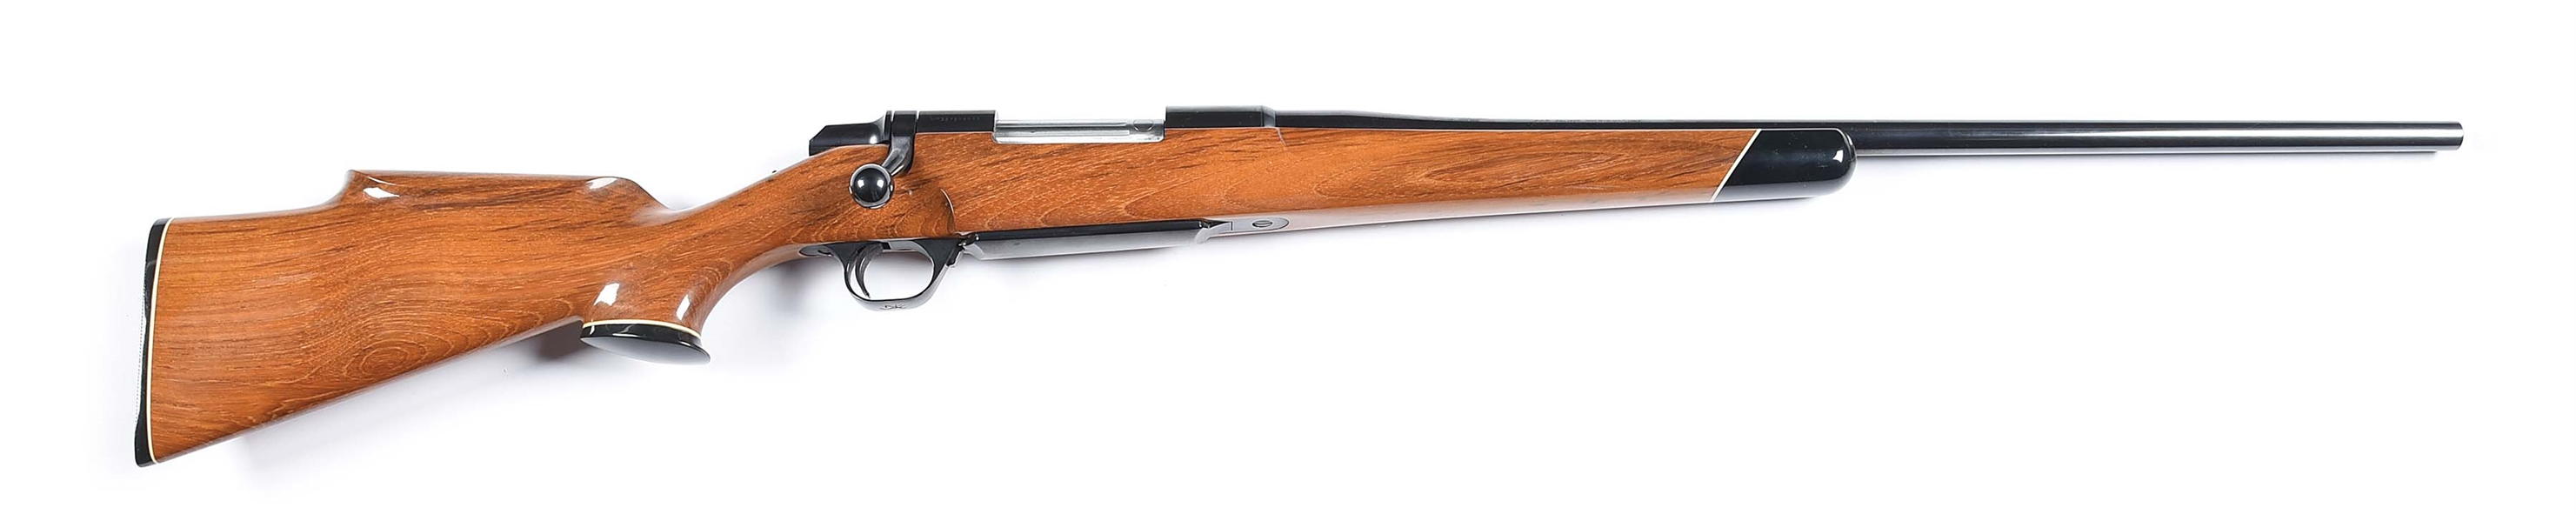 (M) BROWNING BBR BOLT ACTION RIFLE WITH TEAK/TECTONA GRANDIS STOCK.